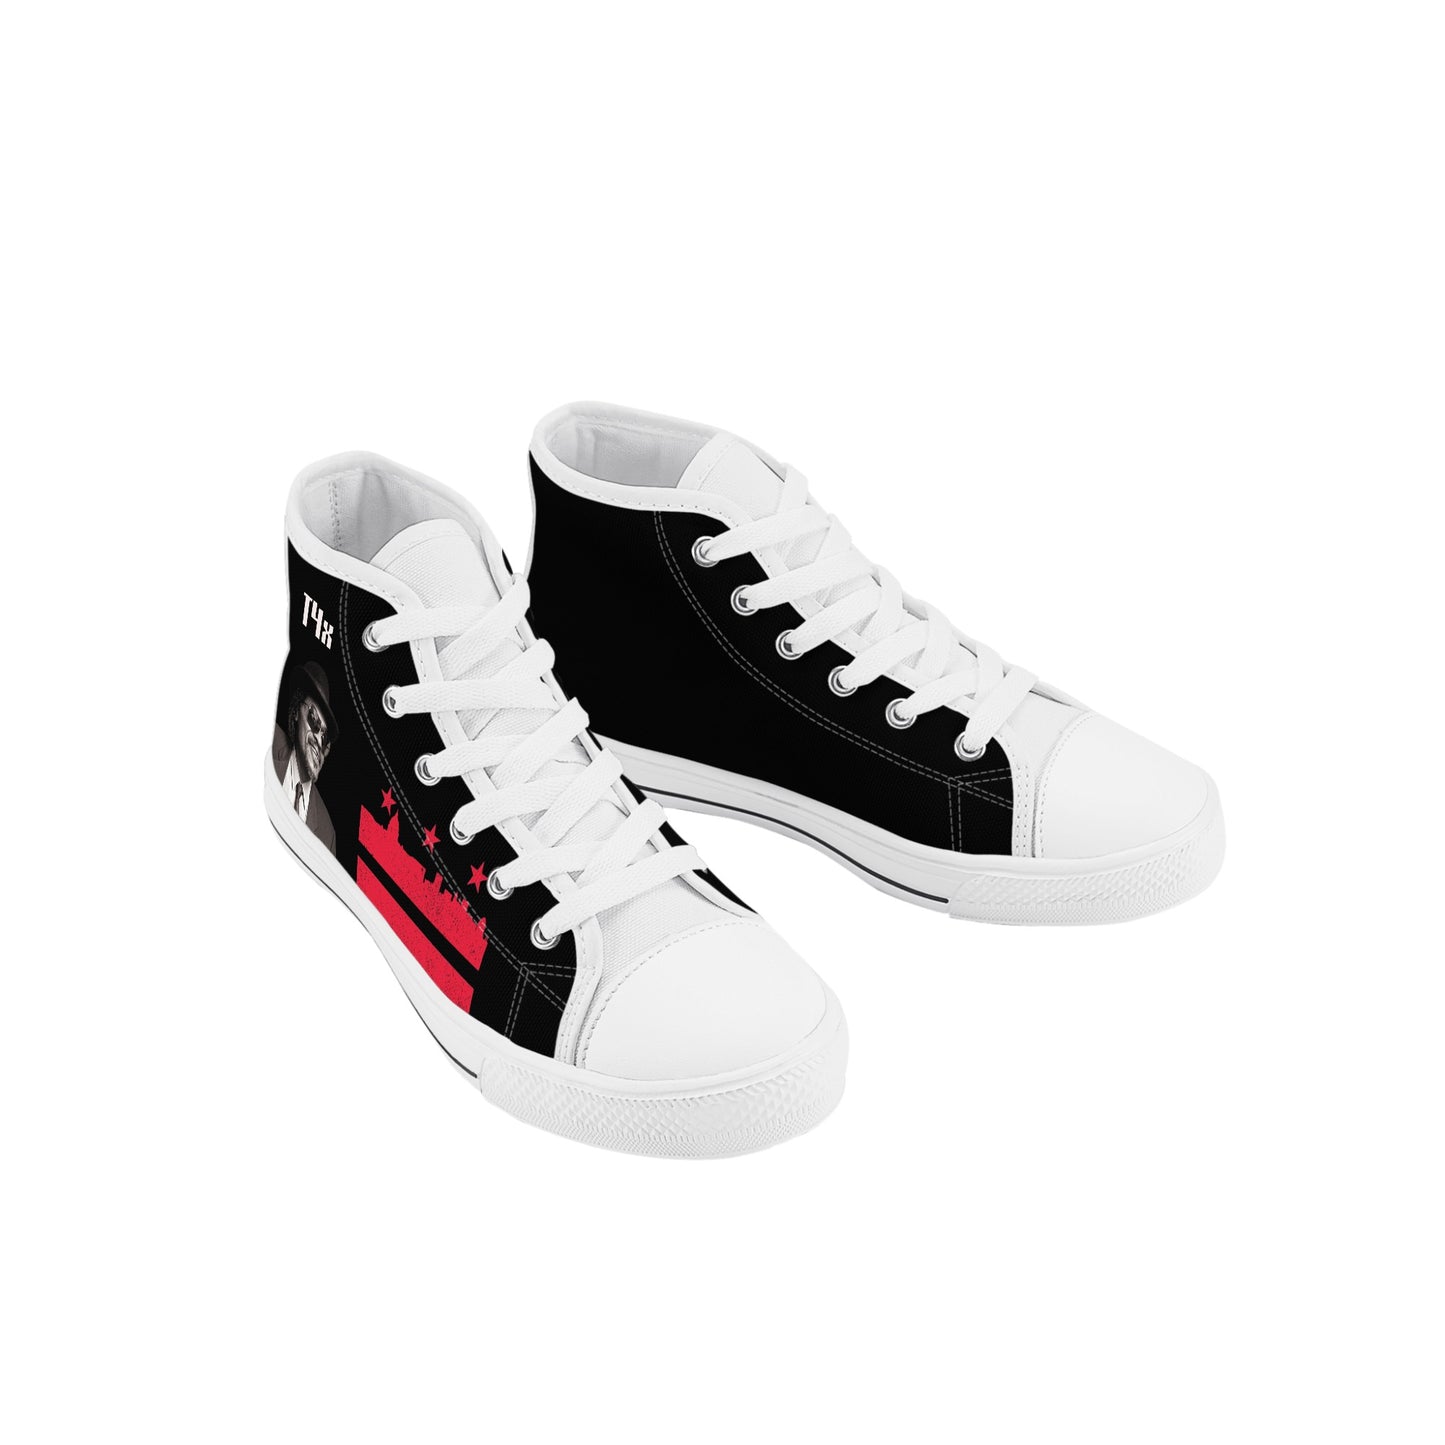 T4x Kids Chuck Baby High Top Canvas Shoes